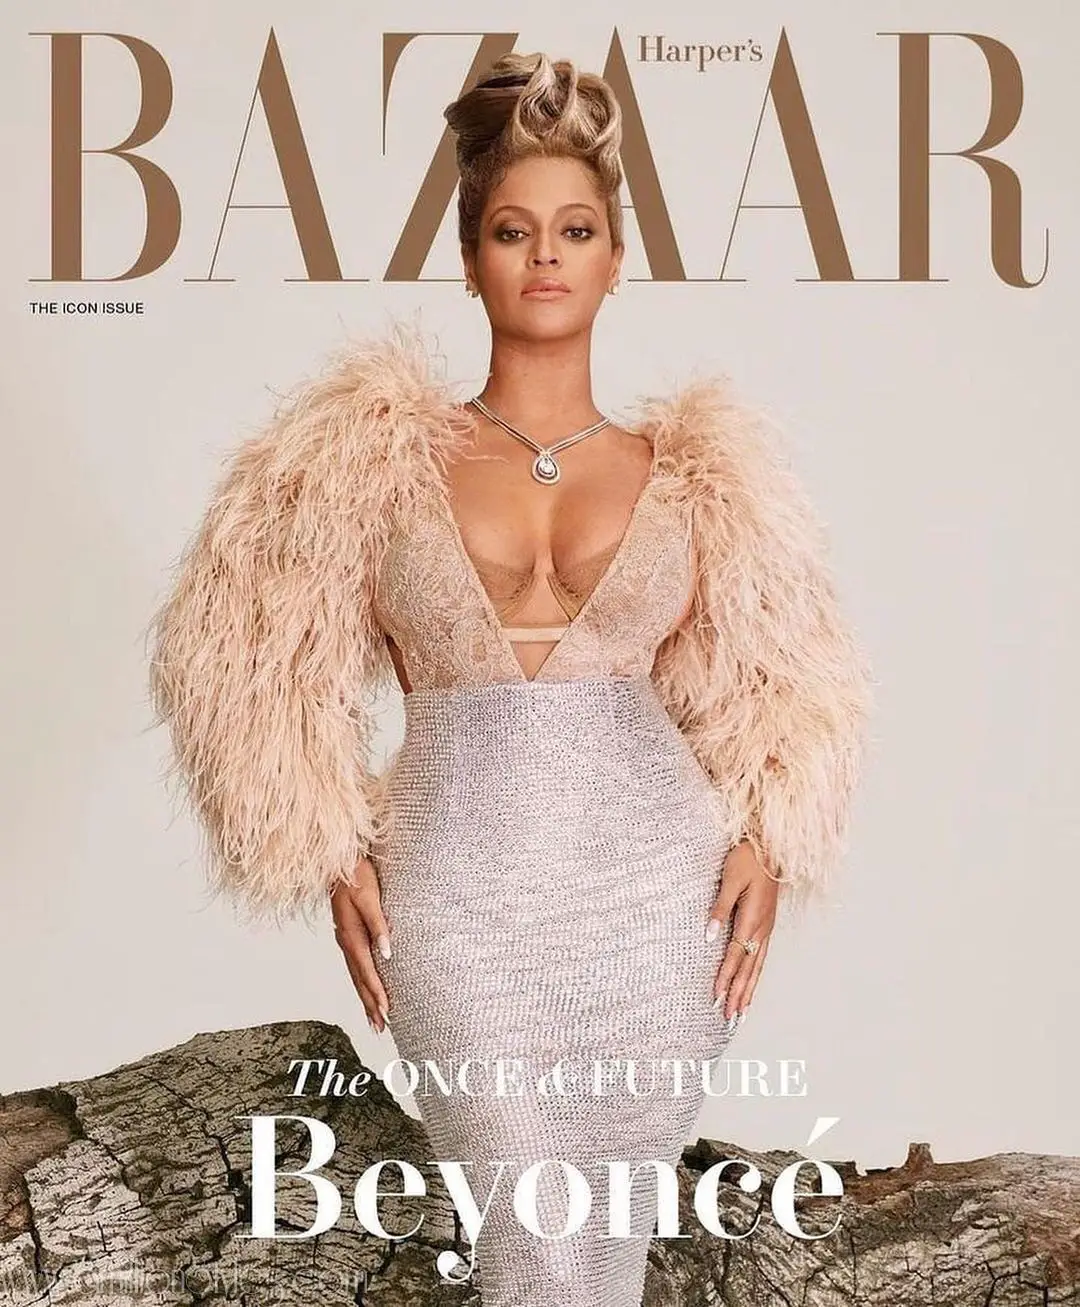 Beyonce Covers Harper's Bazaar "The Icon Issue"